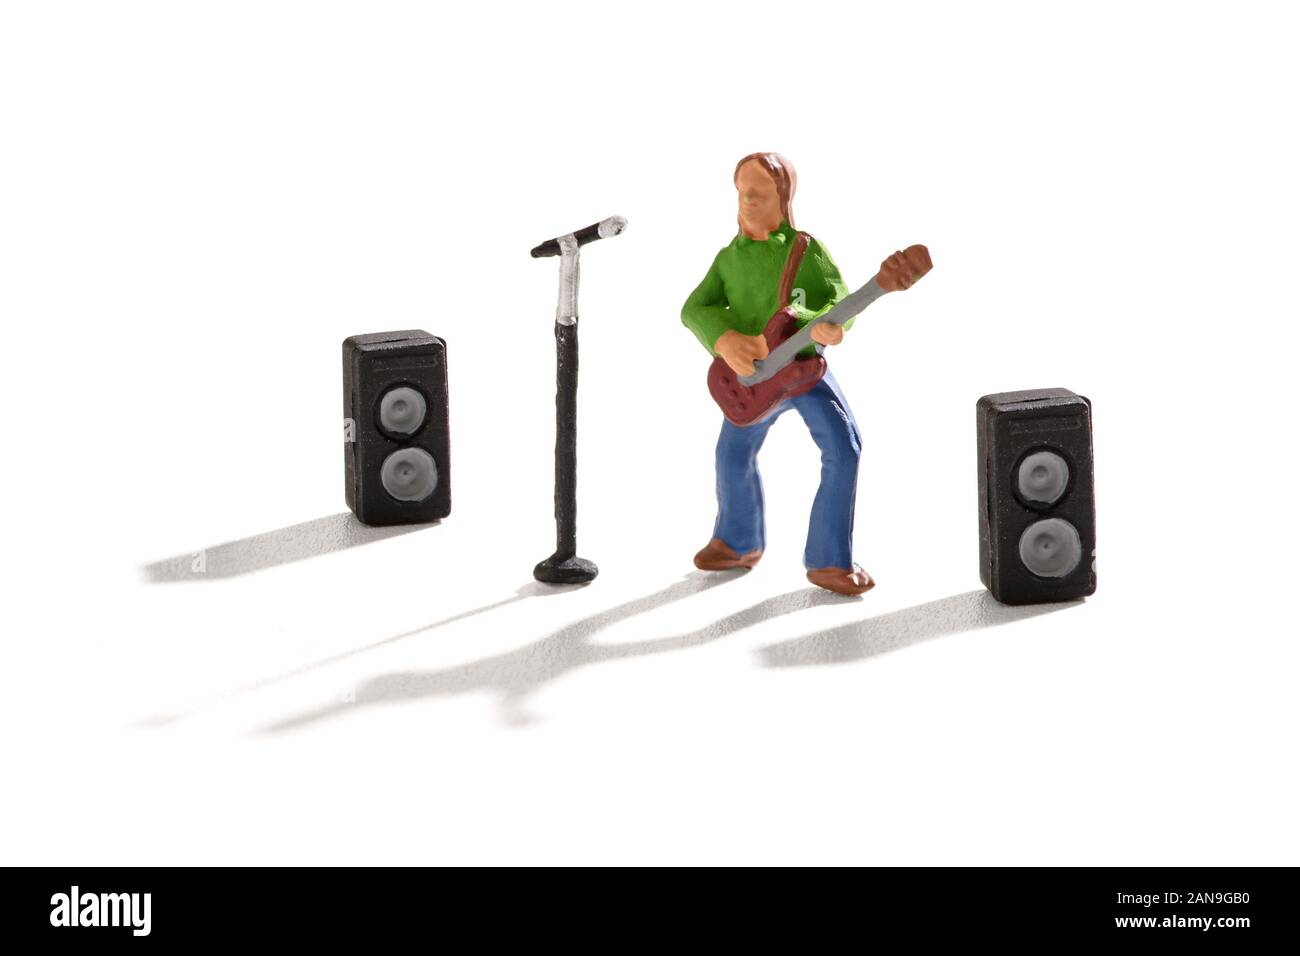 Miniature figure of a rock star playing a guitar and singing in front of a  microphone and speakers in an entertainment and rock n roll music concept  Stock Photo - Alamy